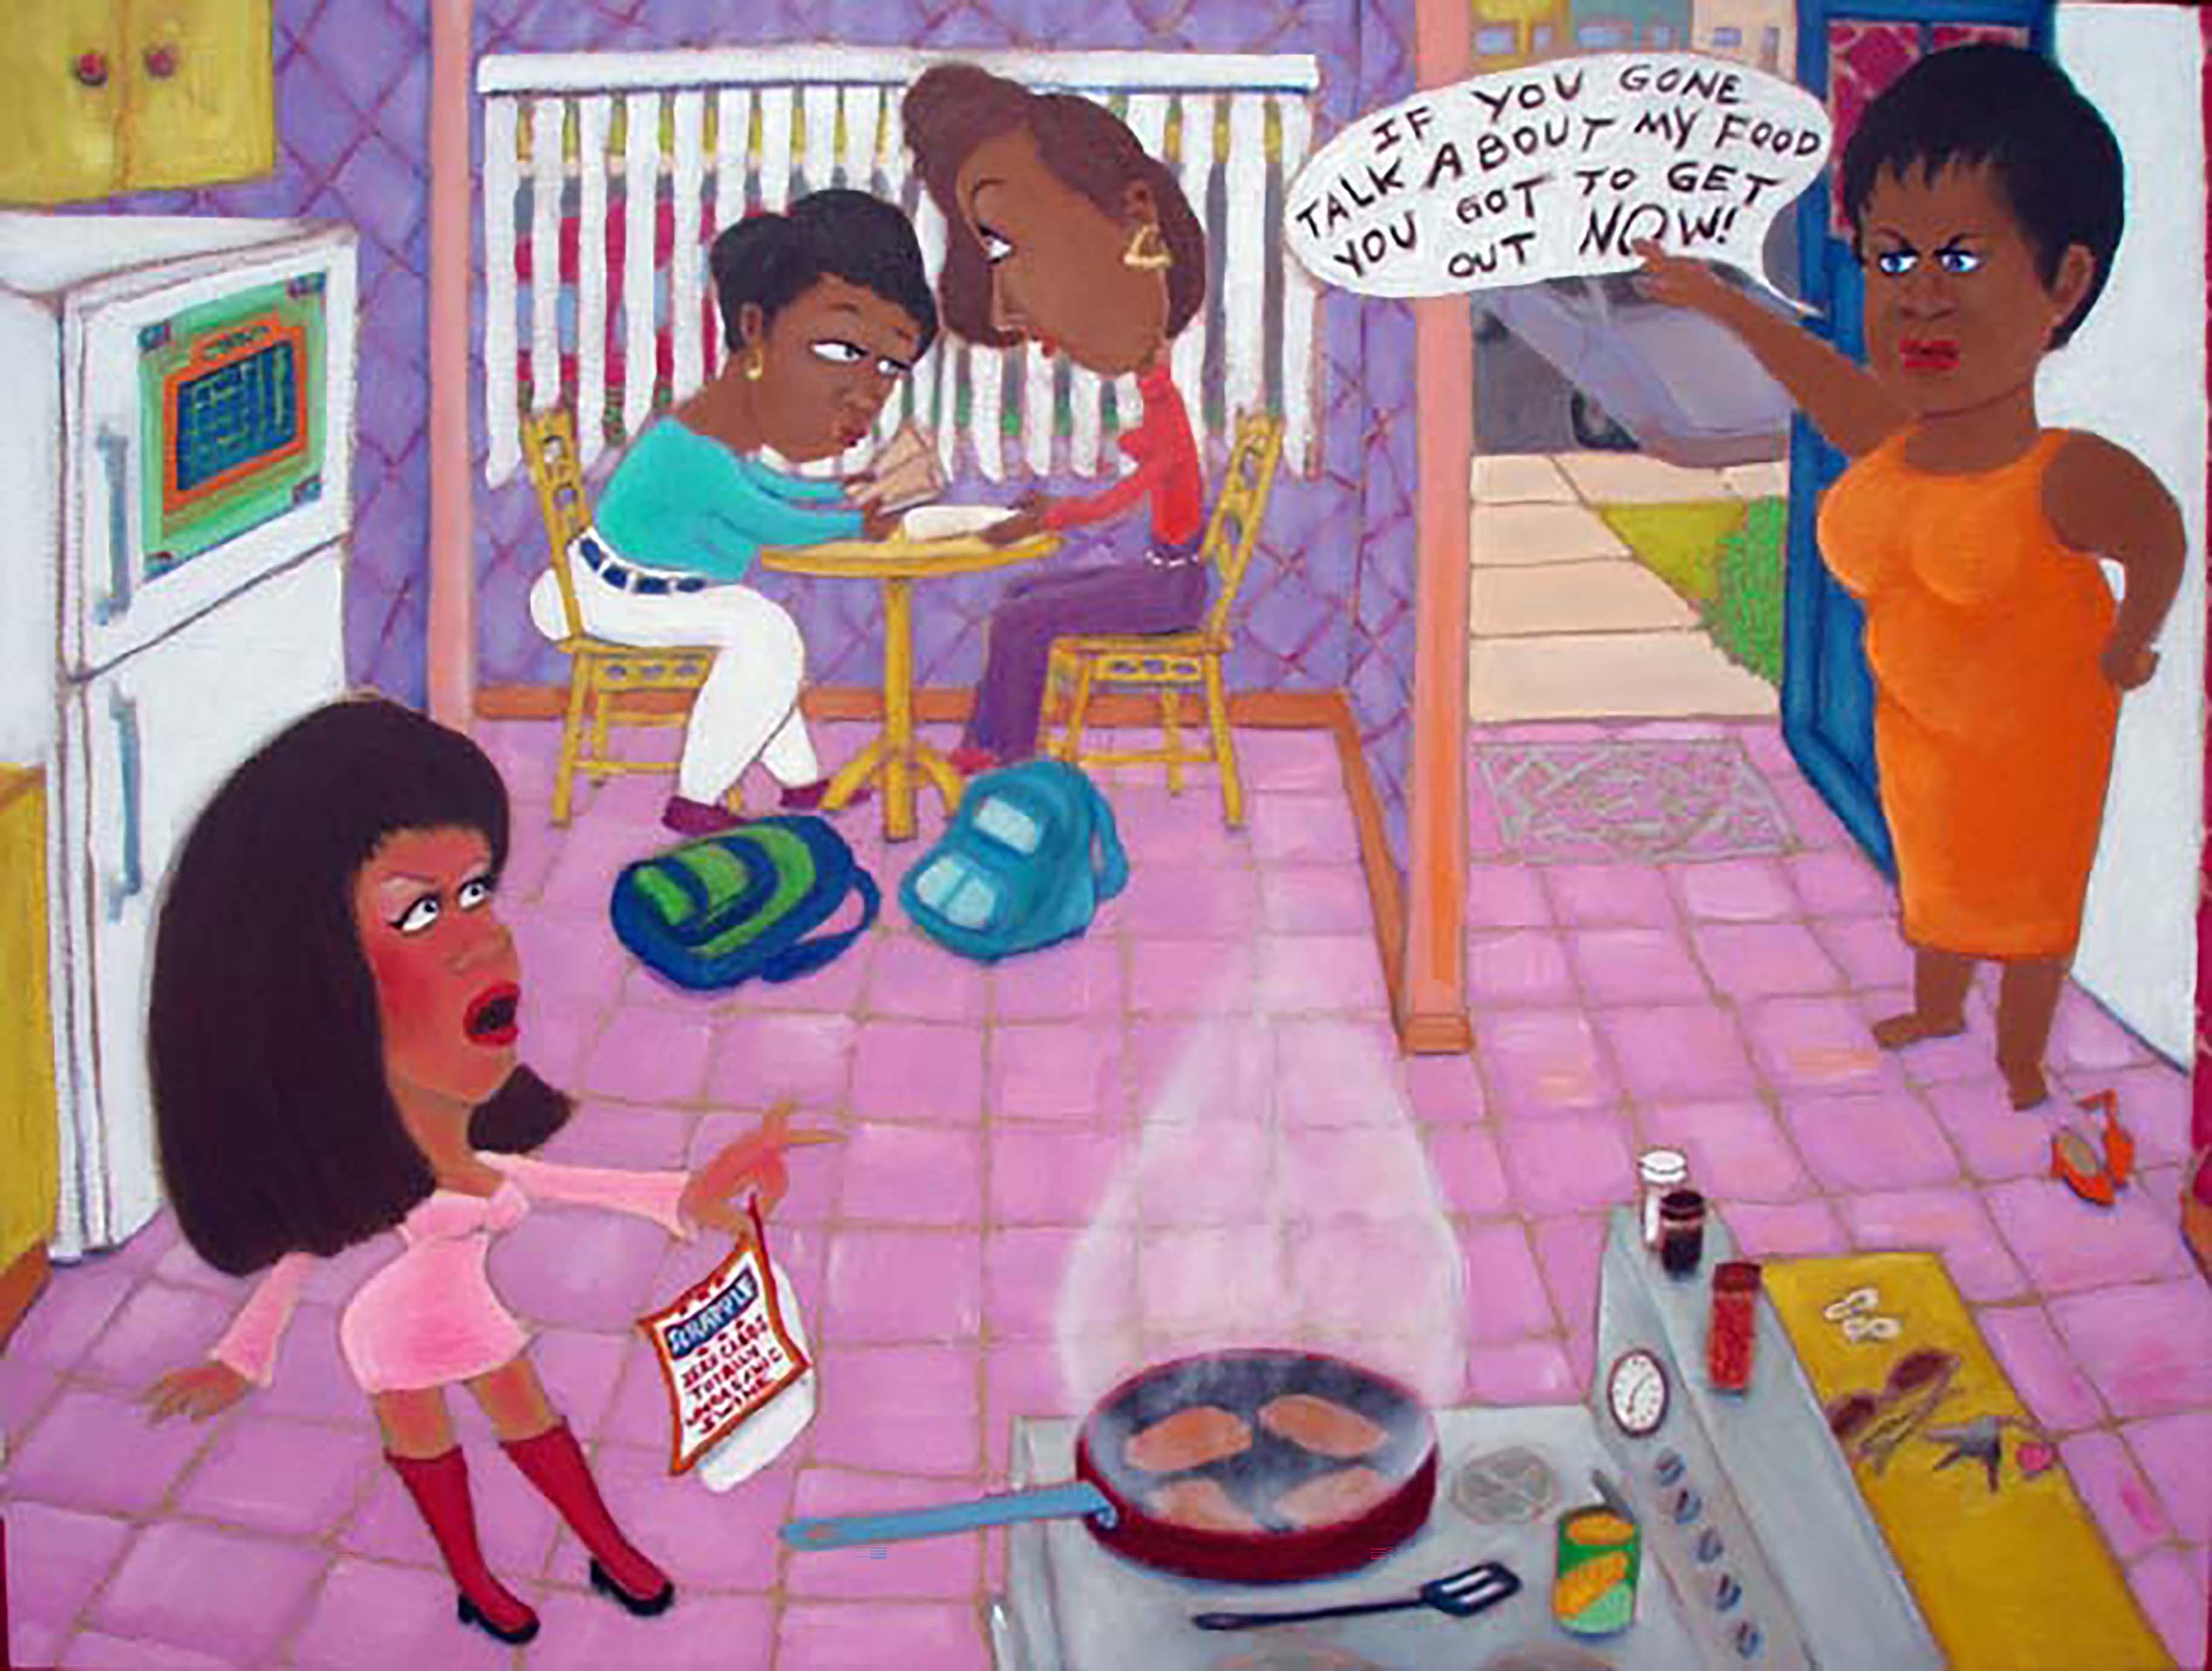 "Talk about My Food" oil on board - Painting by Zeal Harris